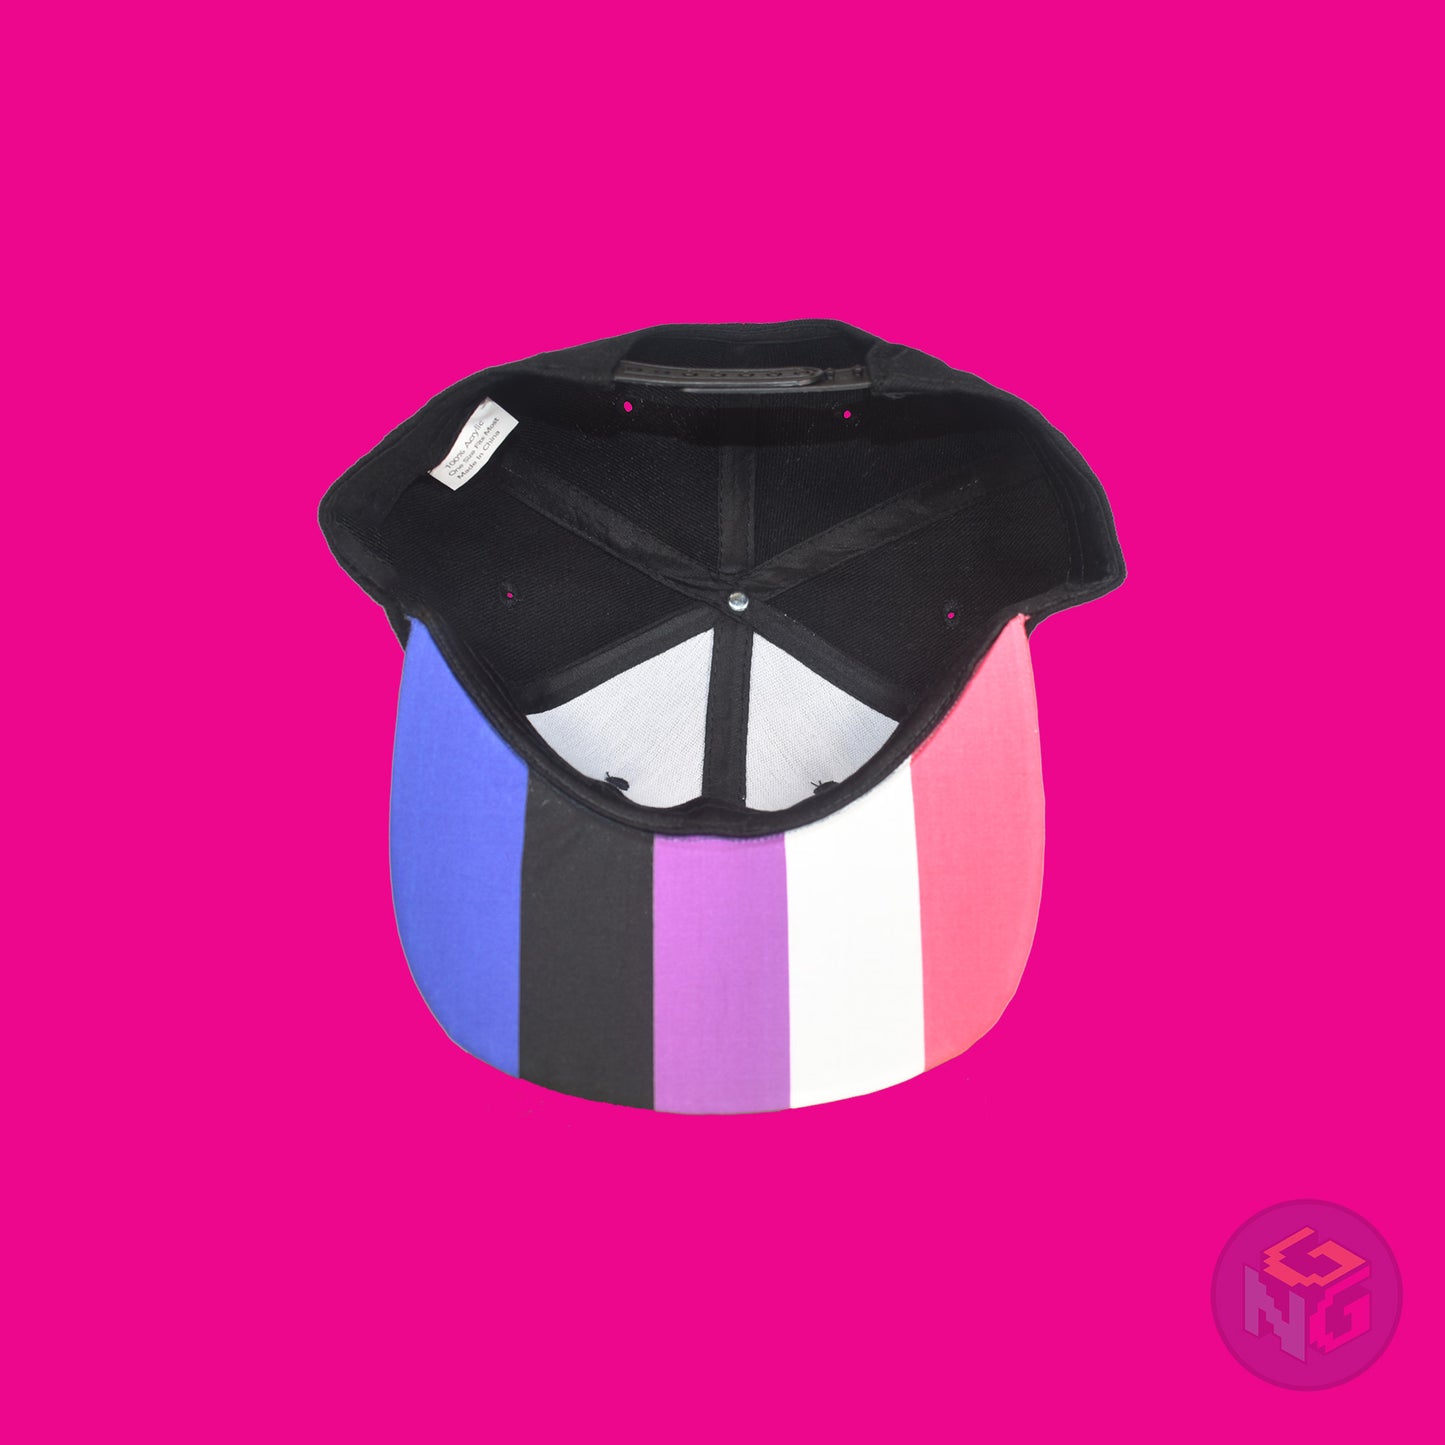 Black flat bill snapback hat. The brim has the genderfluid pride flag on both sides and the front of the hat has the word “FLUID” in peach, white, magenta, and royal blue letters. Underside view